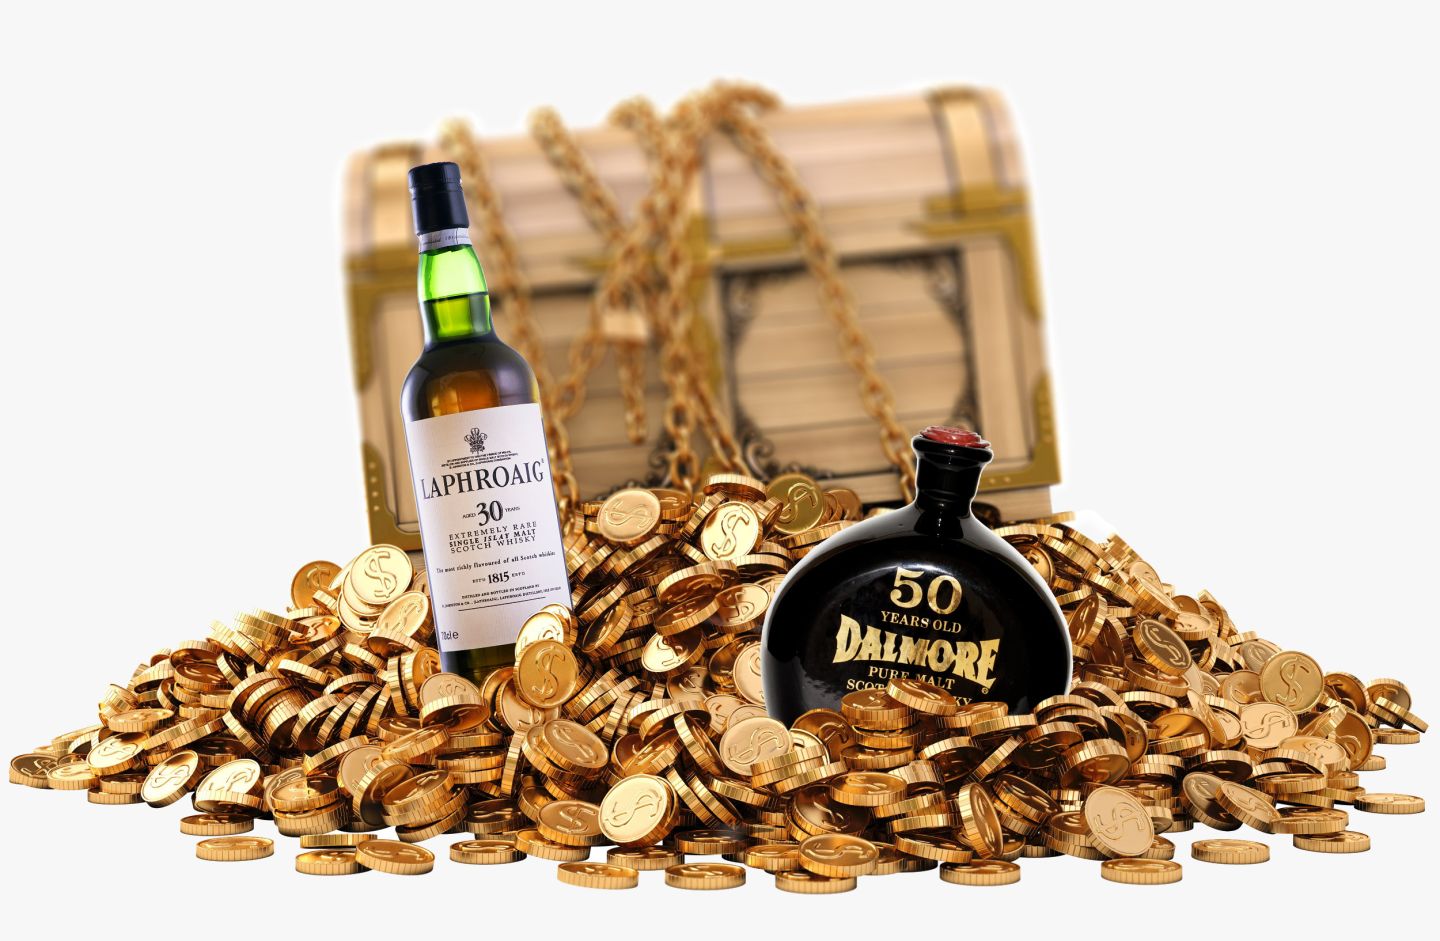 Whisky Bottles and Treasure Chest with Coins